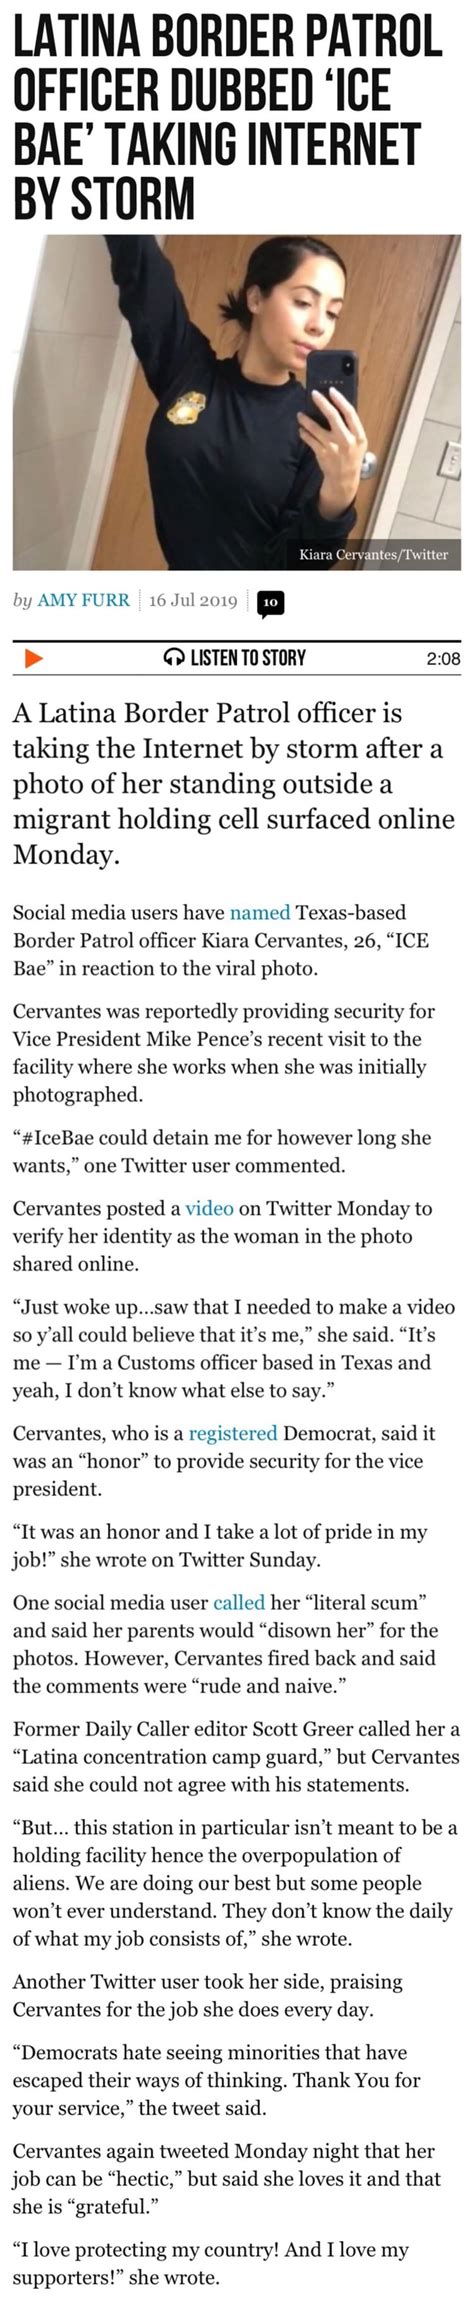 Latina Border Patrol Officer Dubbed “ice Bae Taking Internet By Storm O Listen T0 Story 208